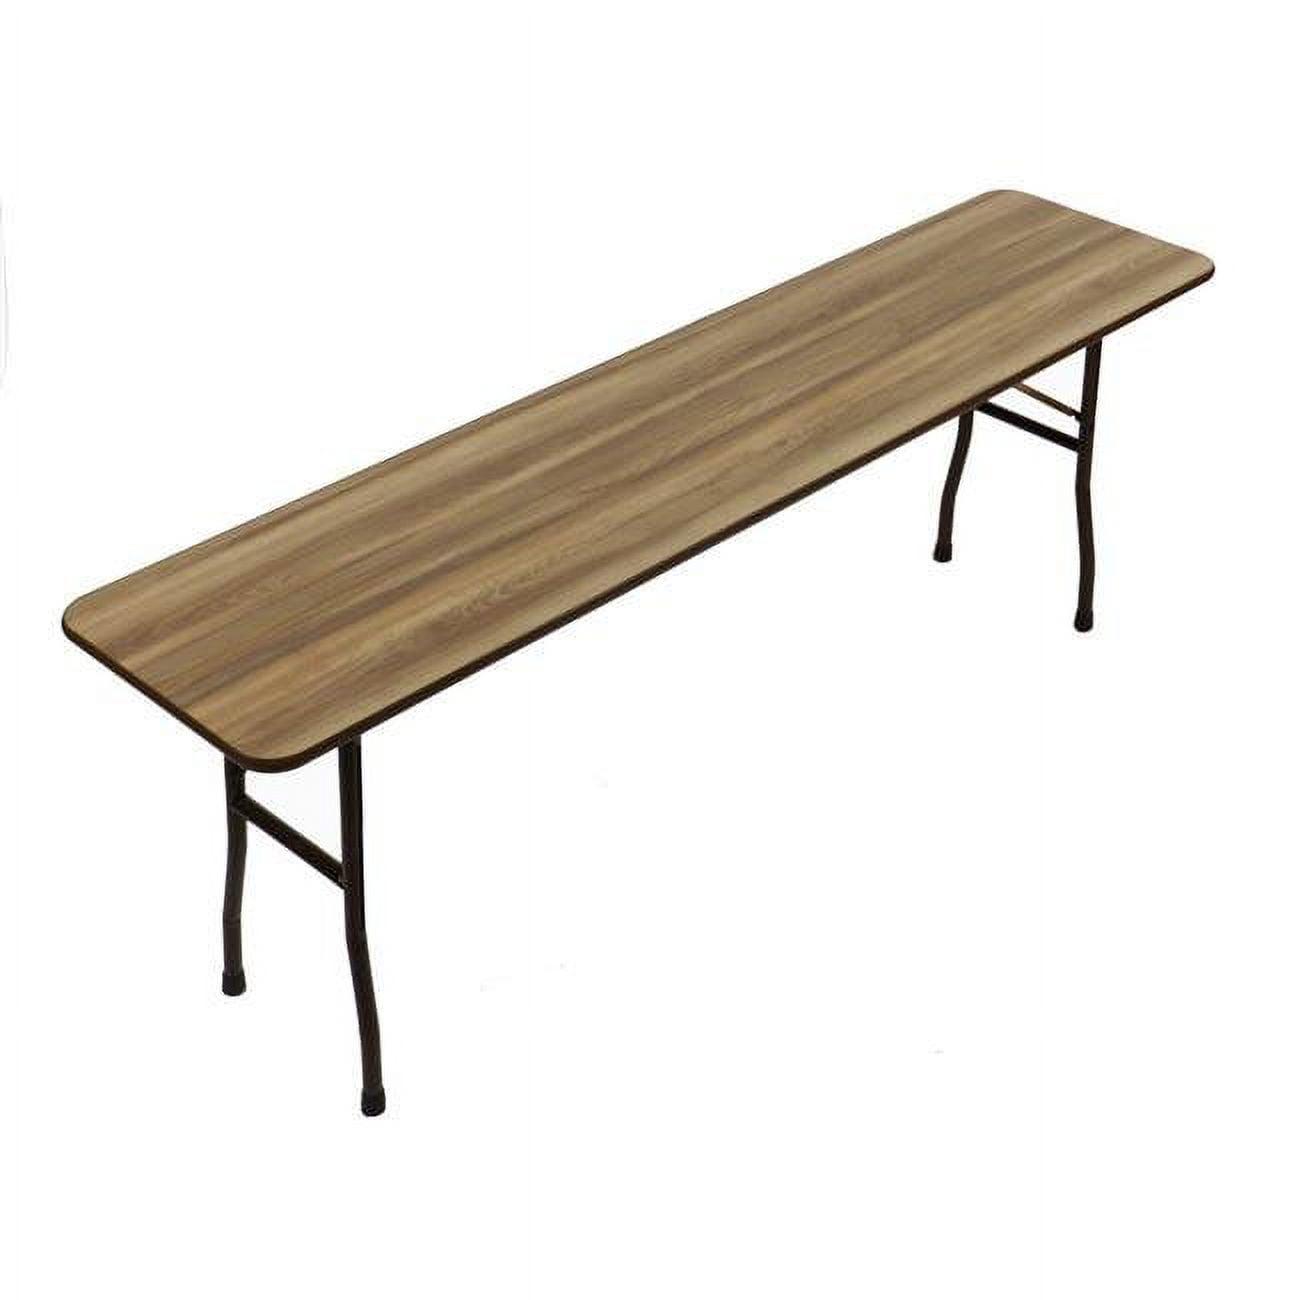 Cf2472px-53 0.75 In. High Pressure Rectangular Top Folding Tables, Colonial Hickory - 24 X 72 In.